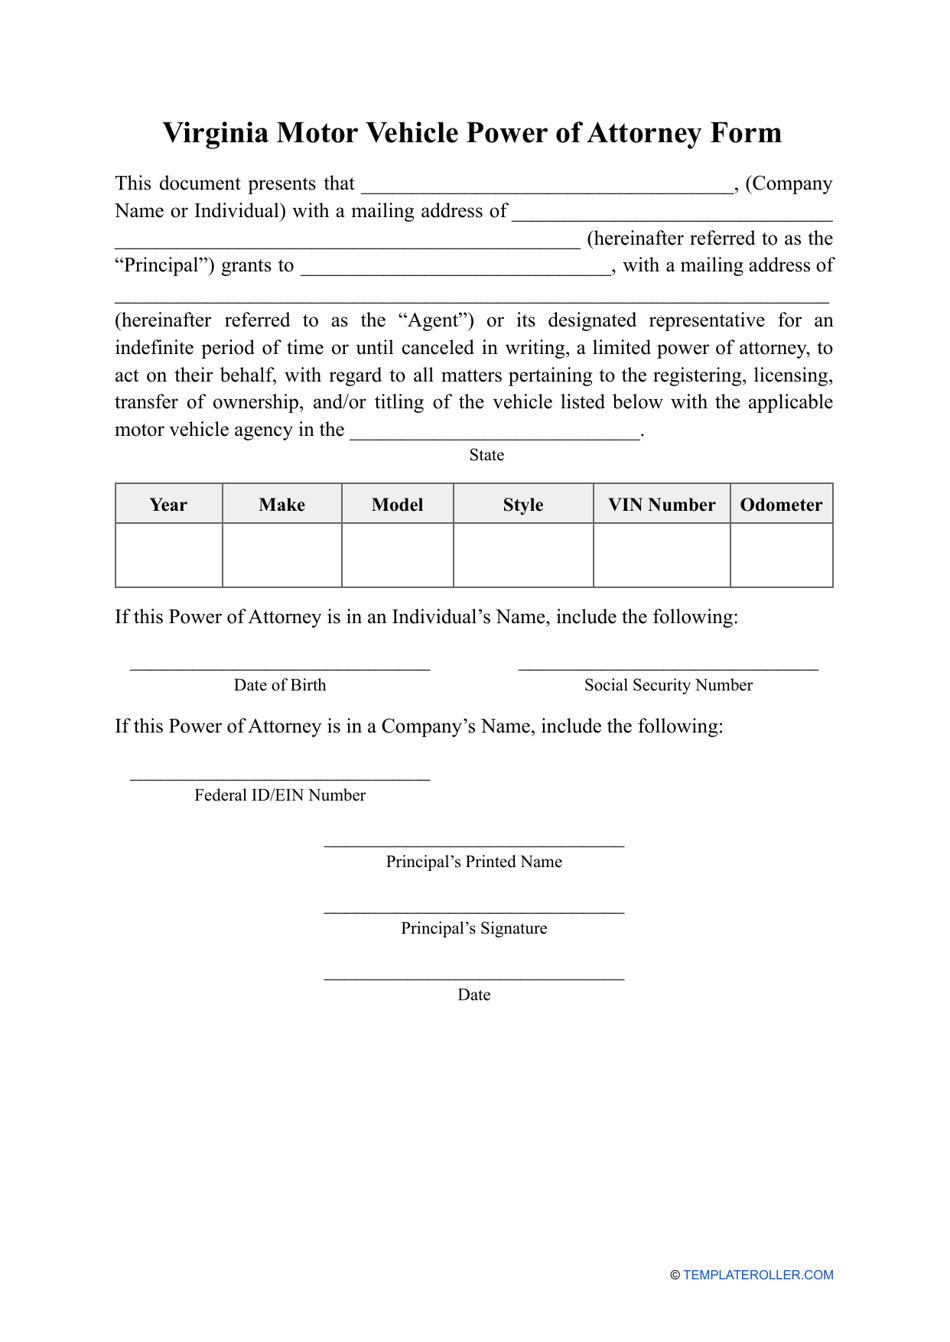 Motor Vehicle Power of Attorney Form - Virginia, Page 1